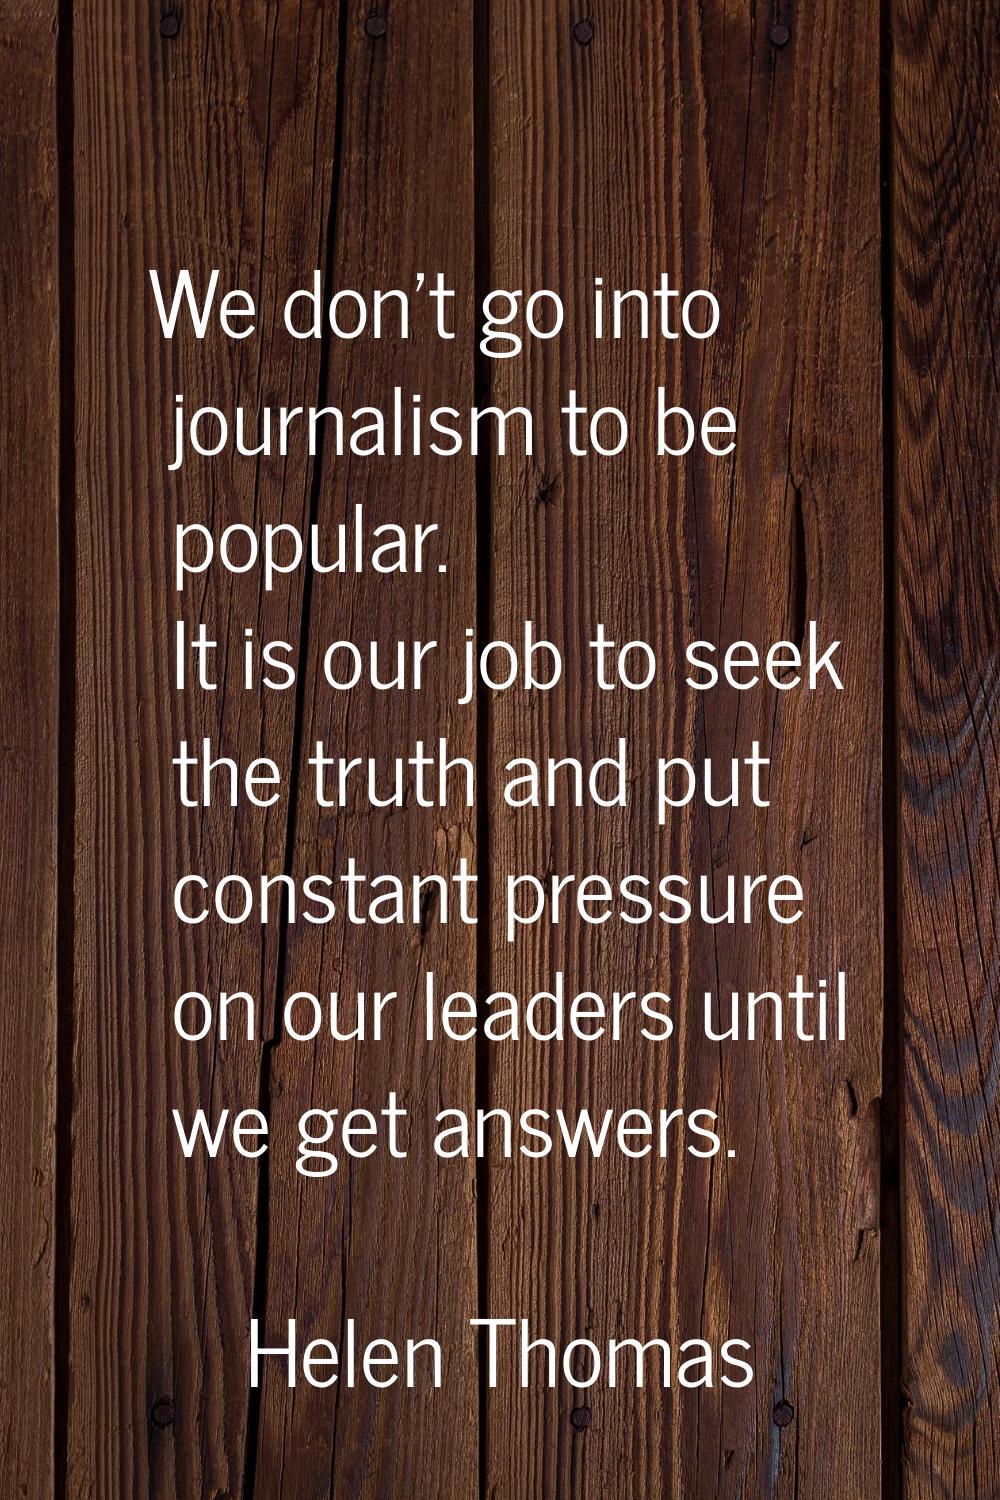 We don't go into journalism to be popular. It is our job to seek the truth and put constant pressur